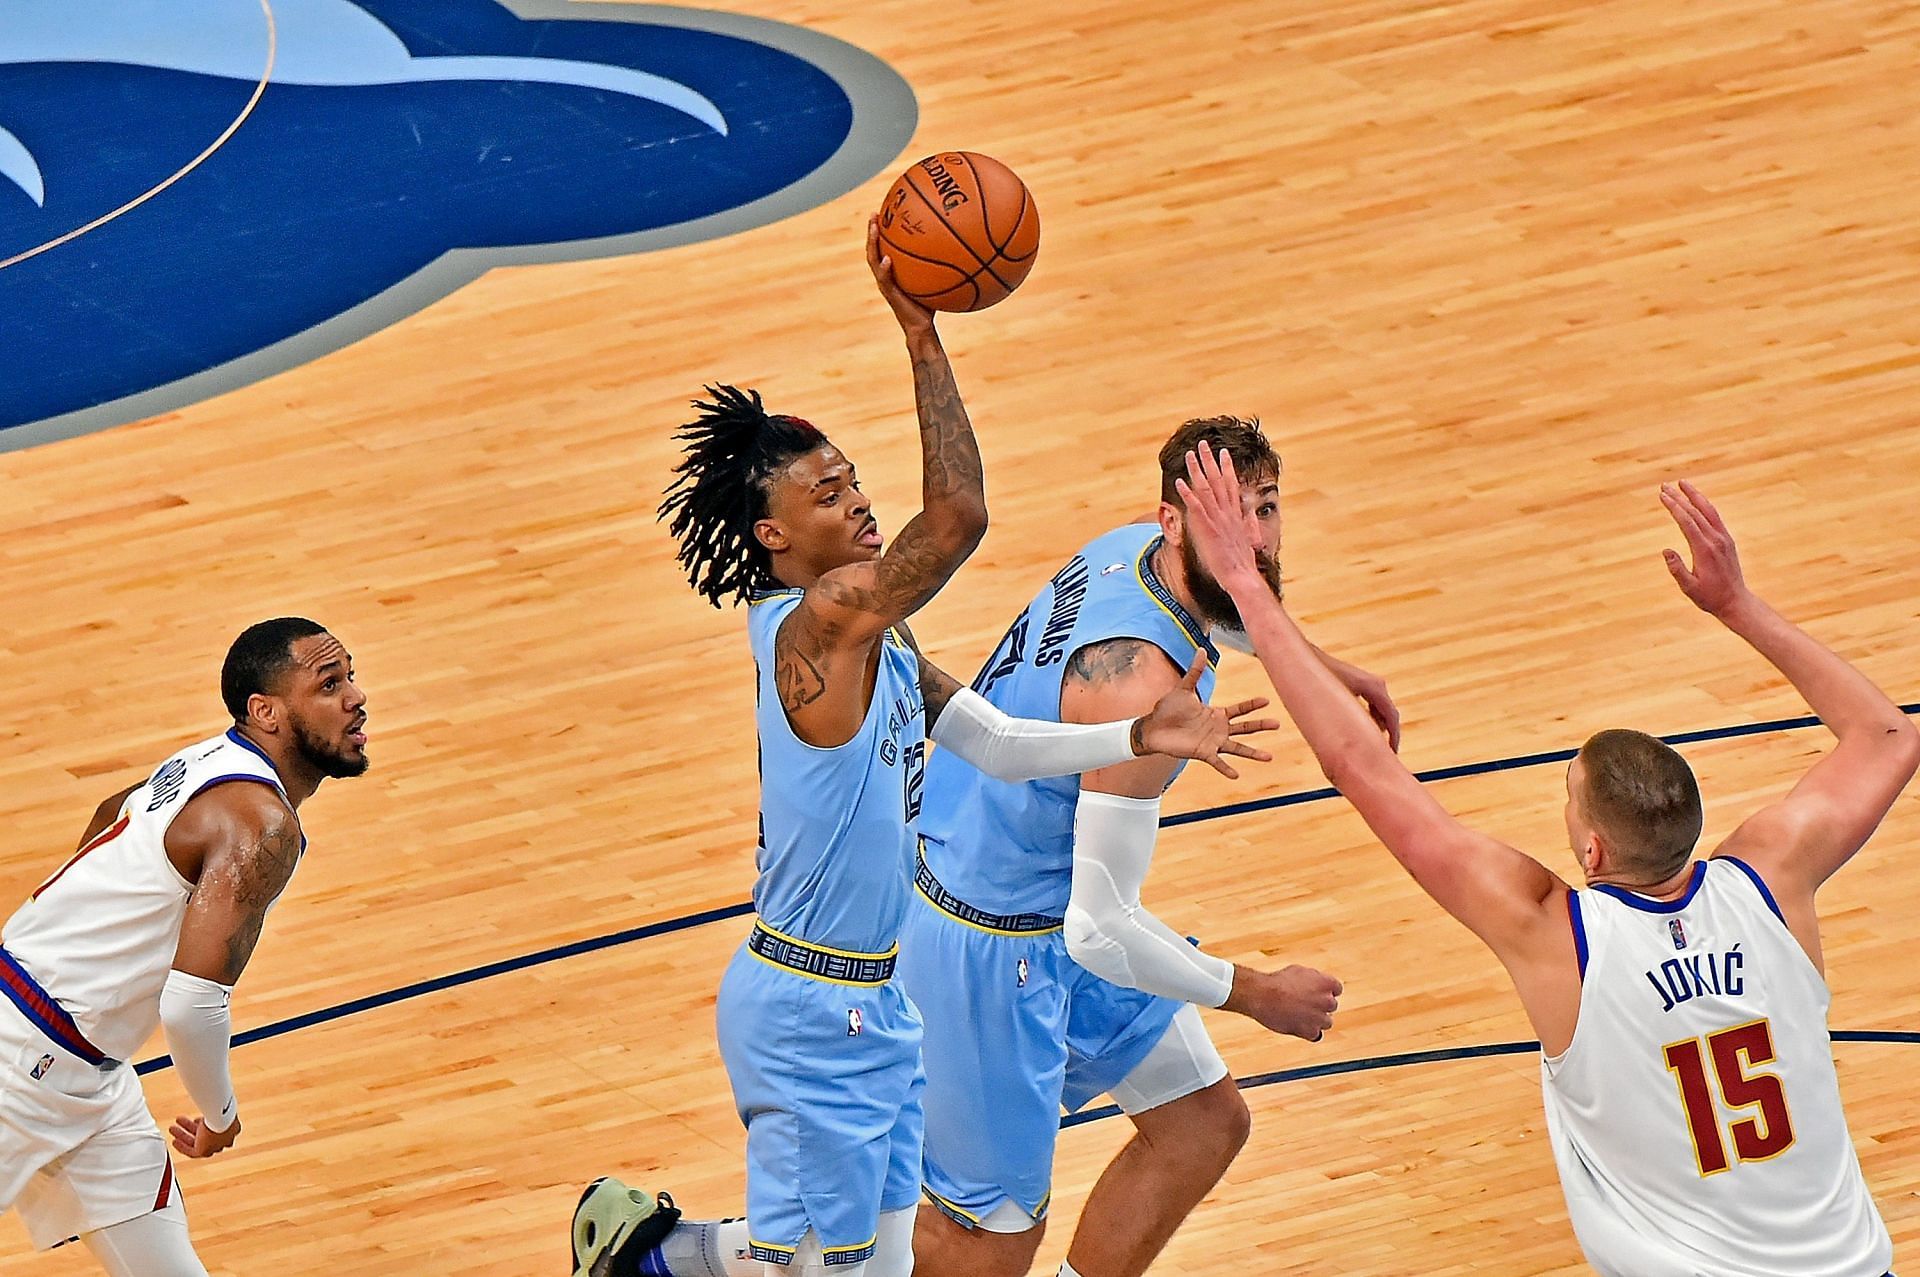 Denver Nuggets will play the Memphis Grizzlies on November 1